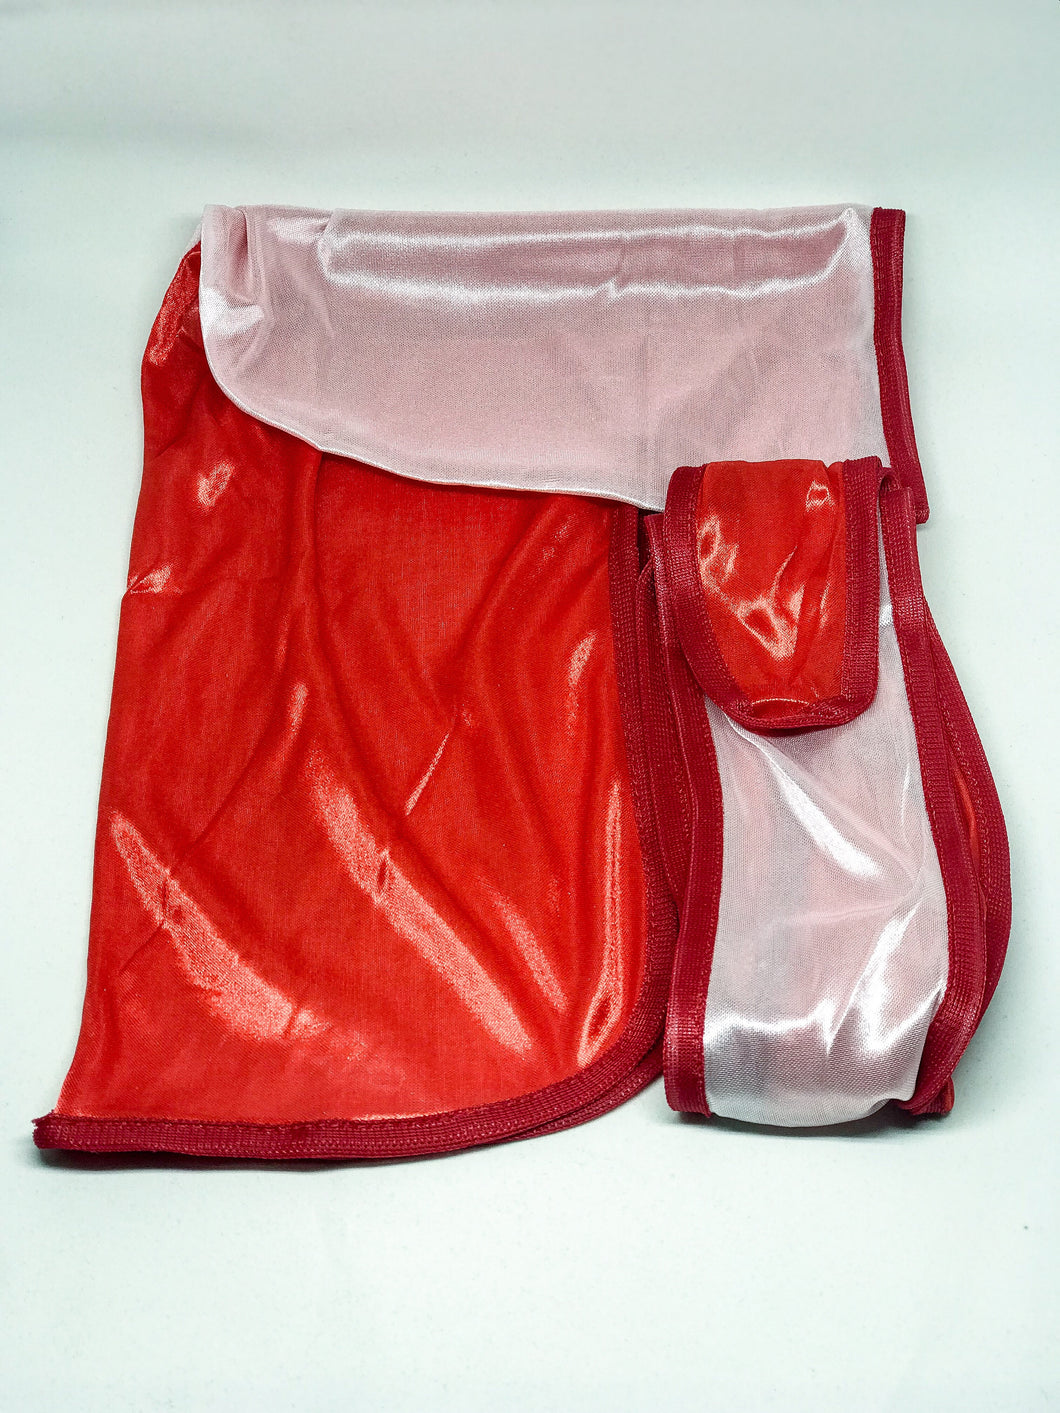 Rimix *PATENT PENDING* Two Tone Silky Durag **Limited Edition** - Red/White